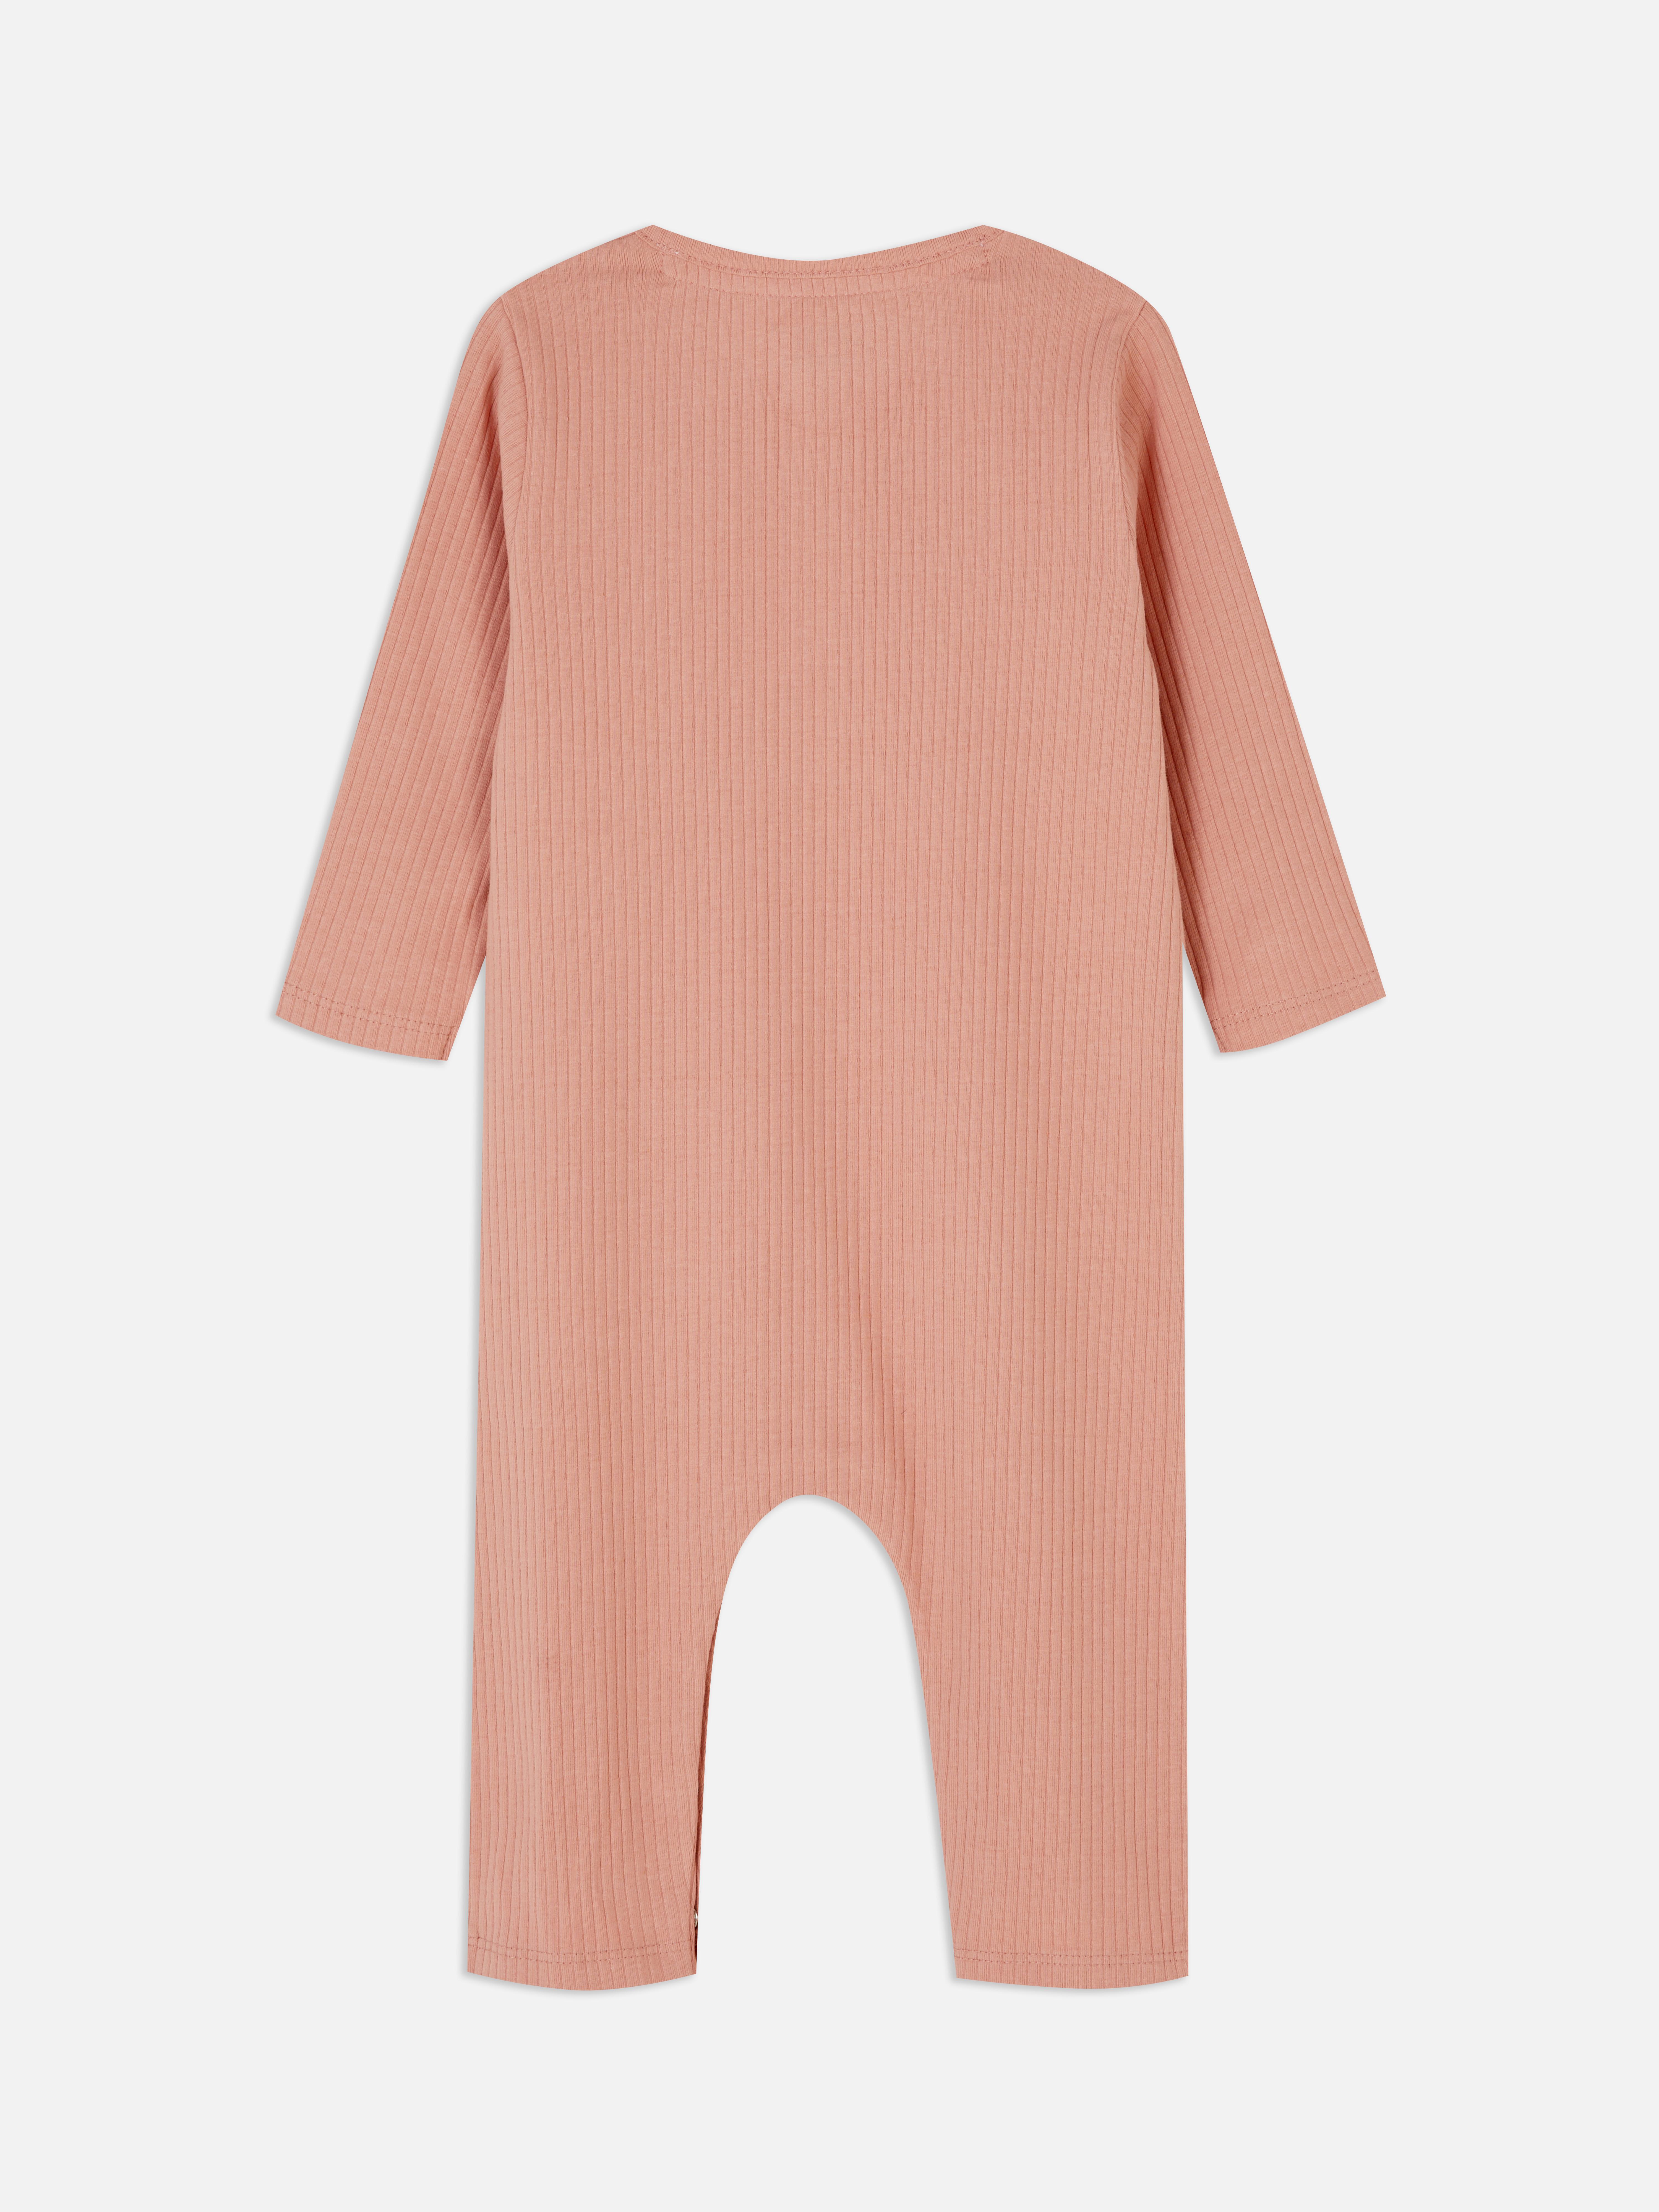 Stacey Solomon Ribbed Romper Suit